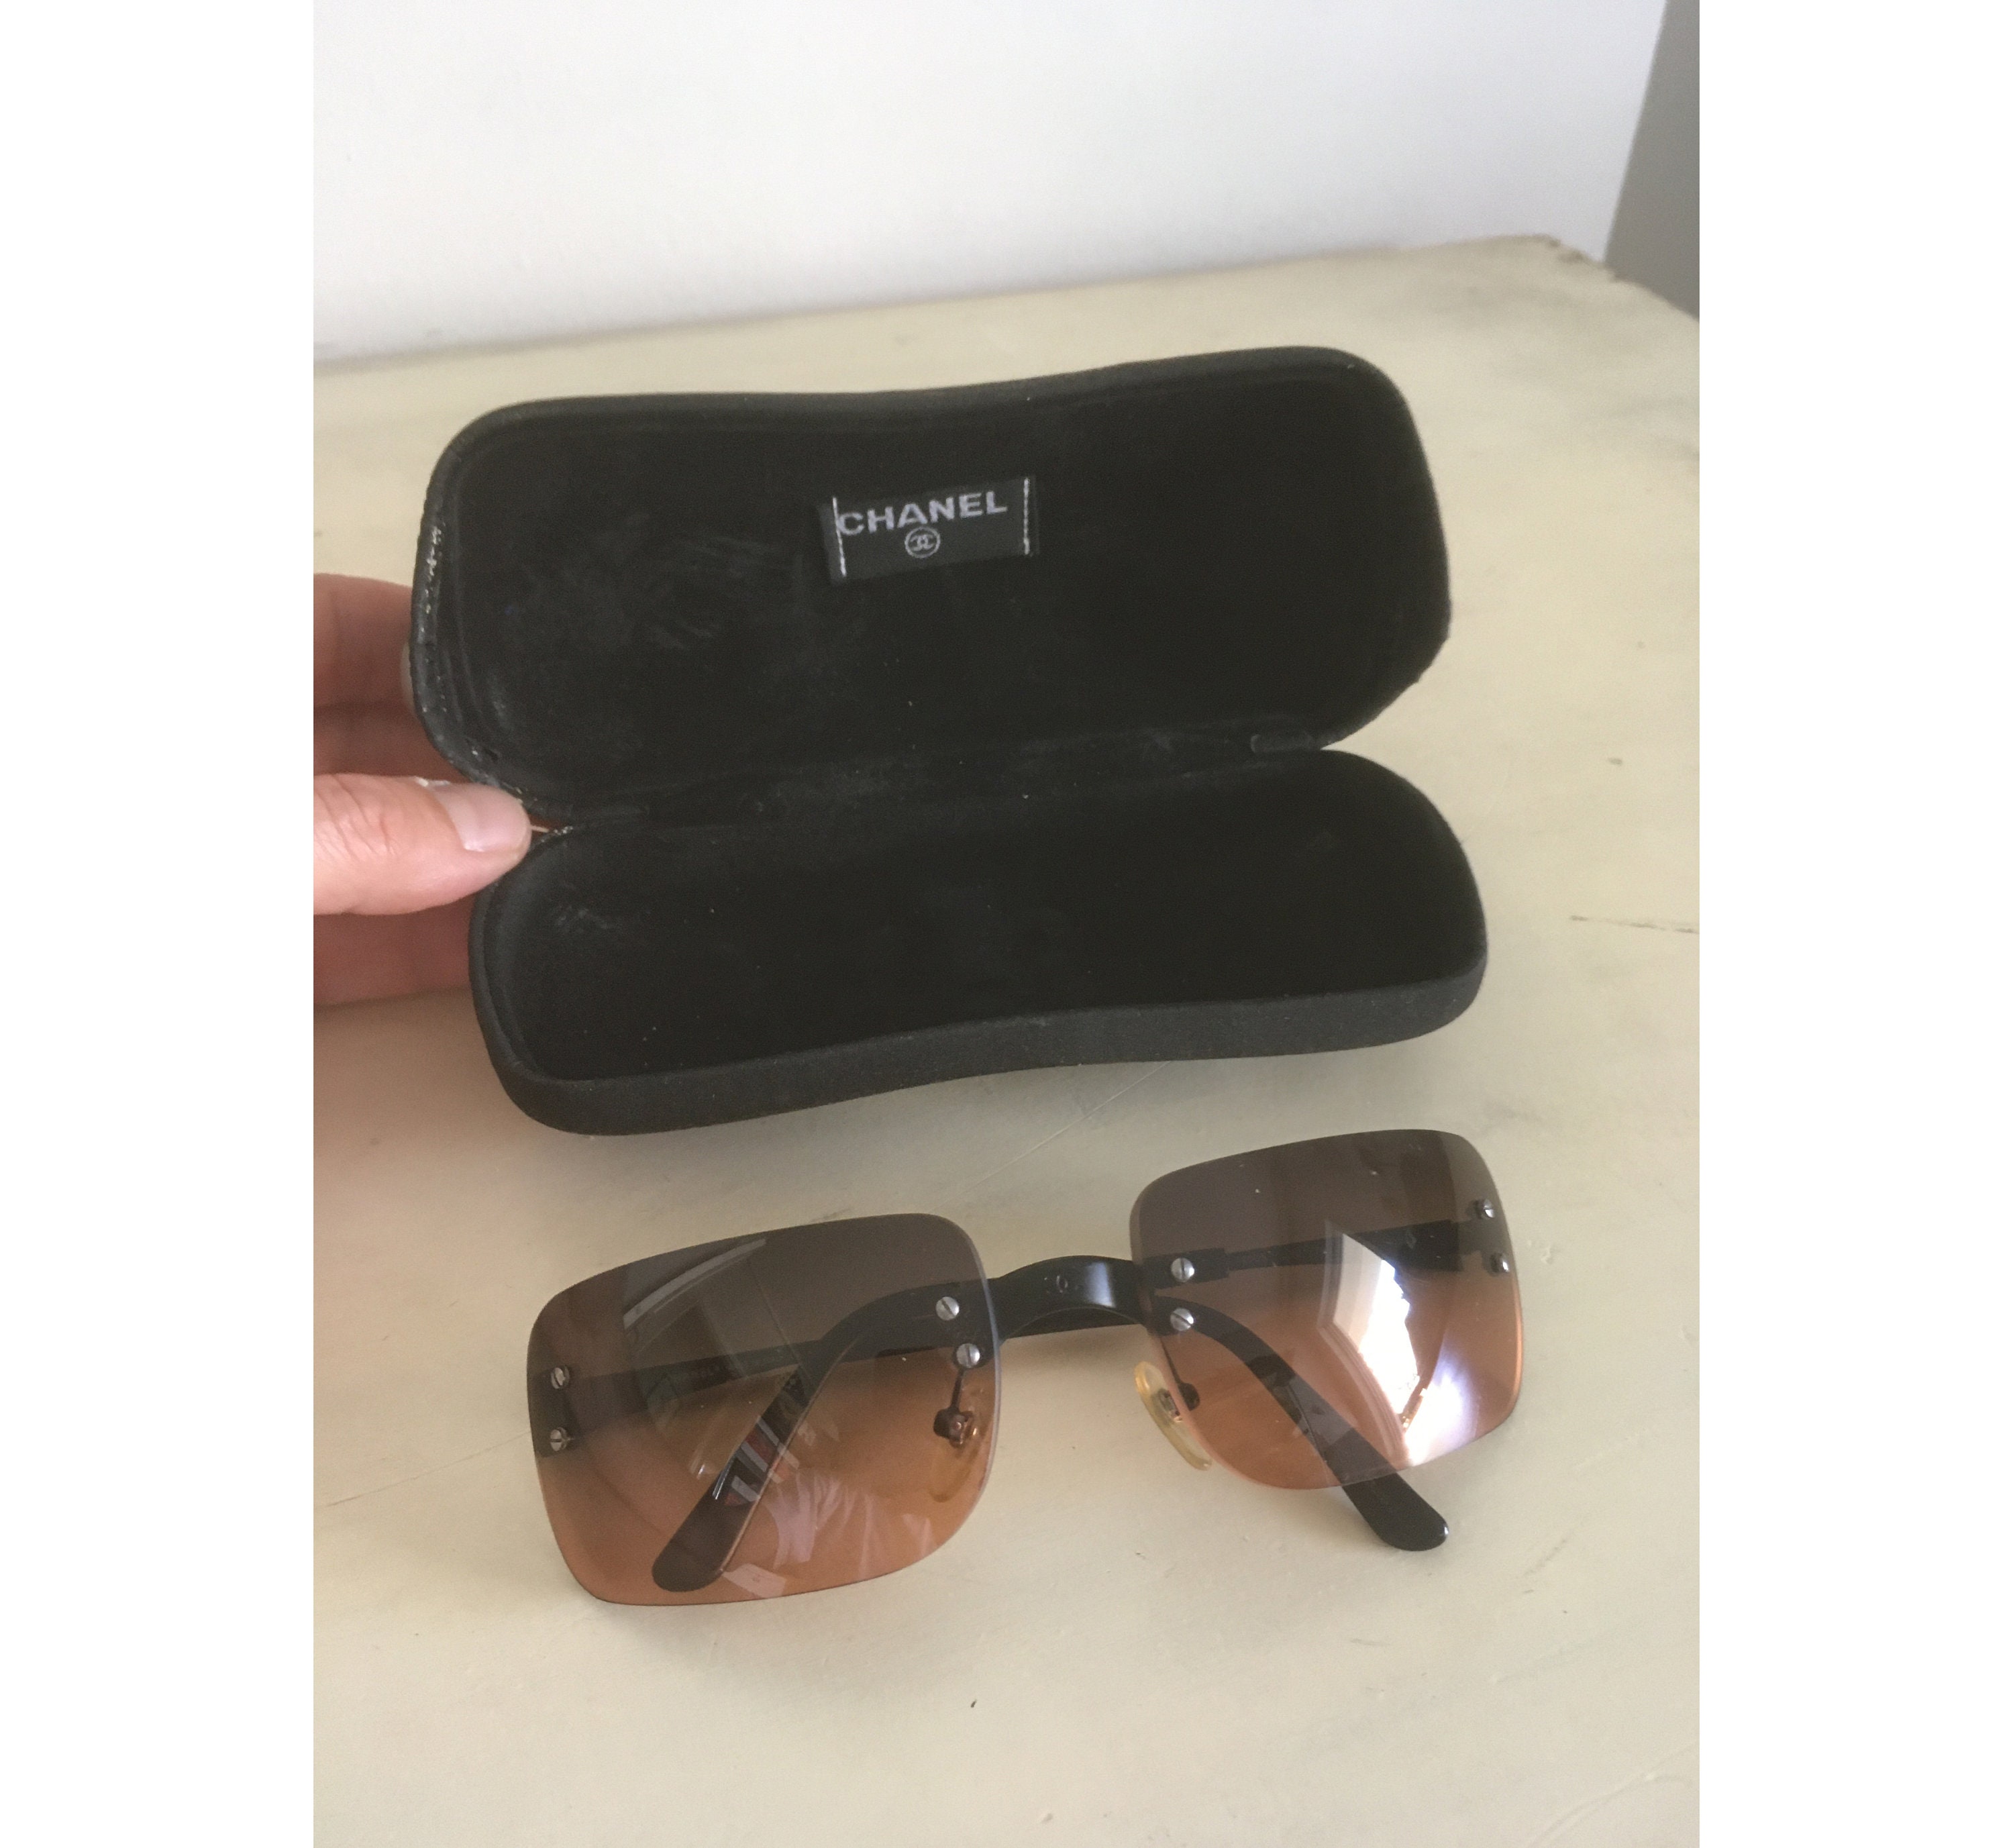 CHANEL Sunglasses Cases for sale